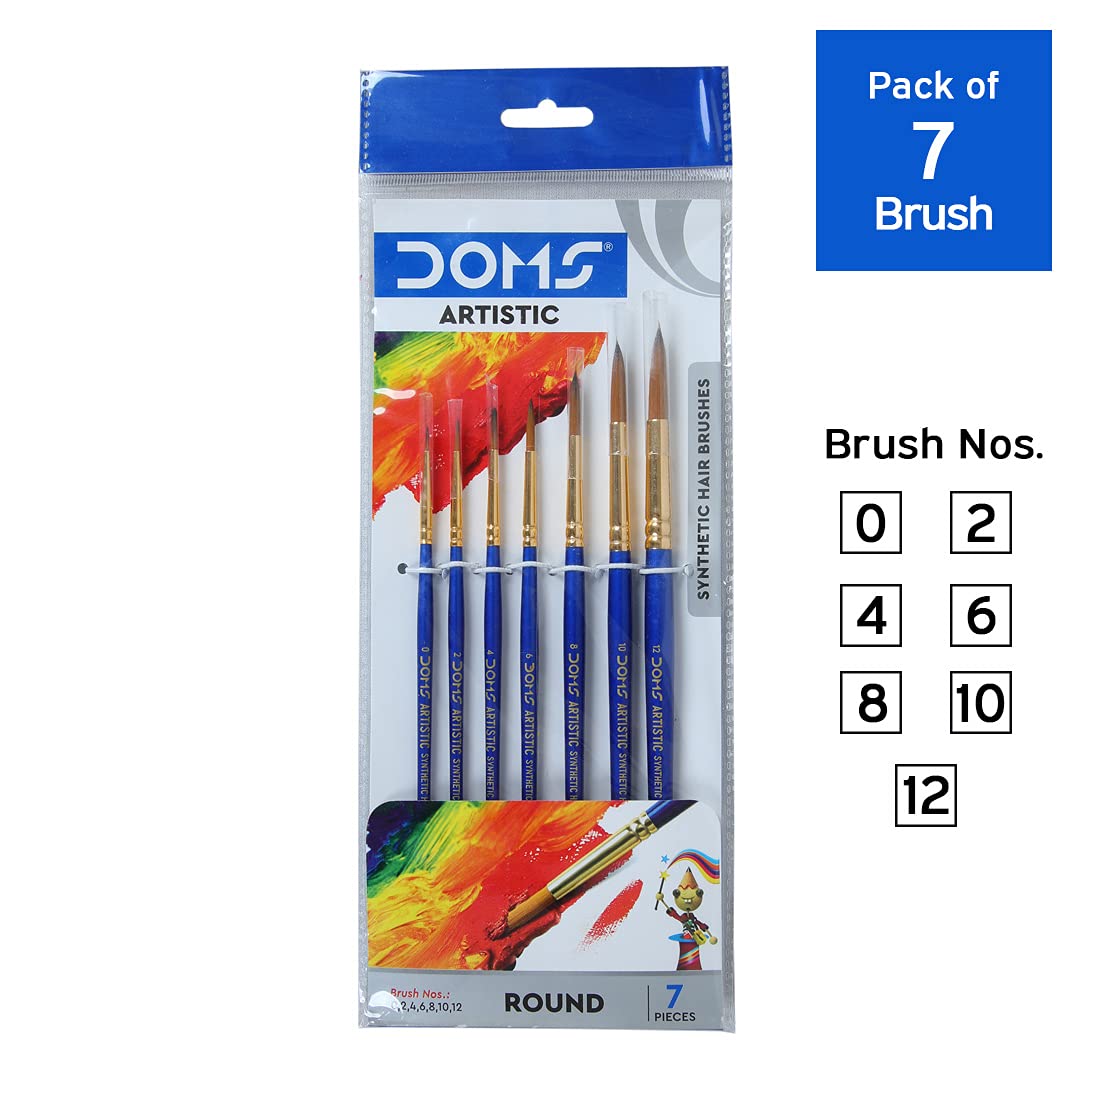 DOMS Artistic Synthetic Paint Brush Set (Round, Pack of 7)